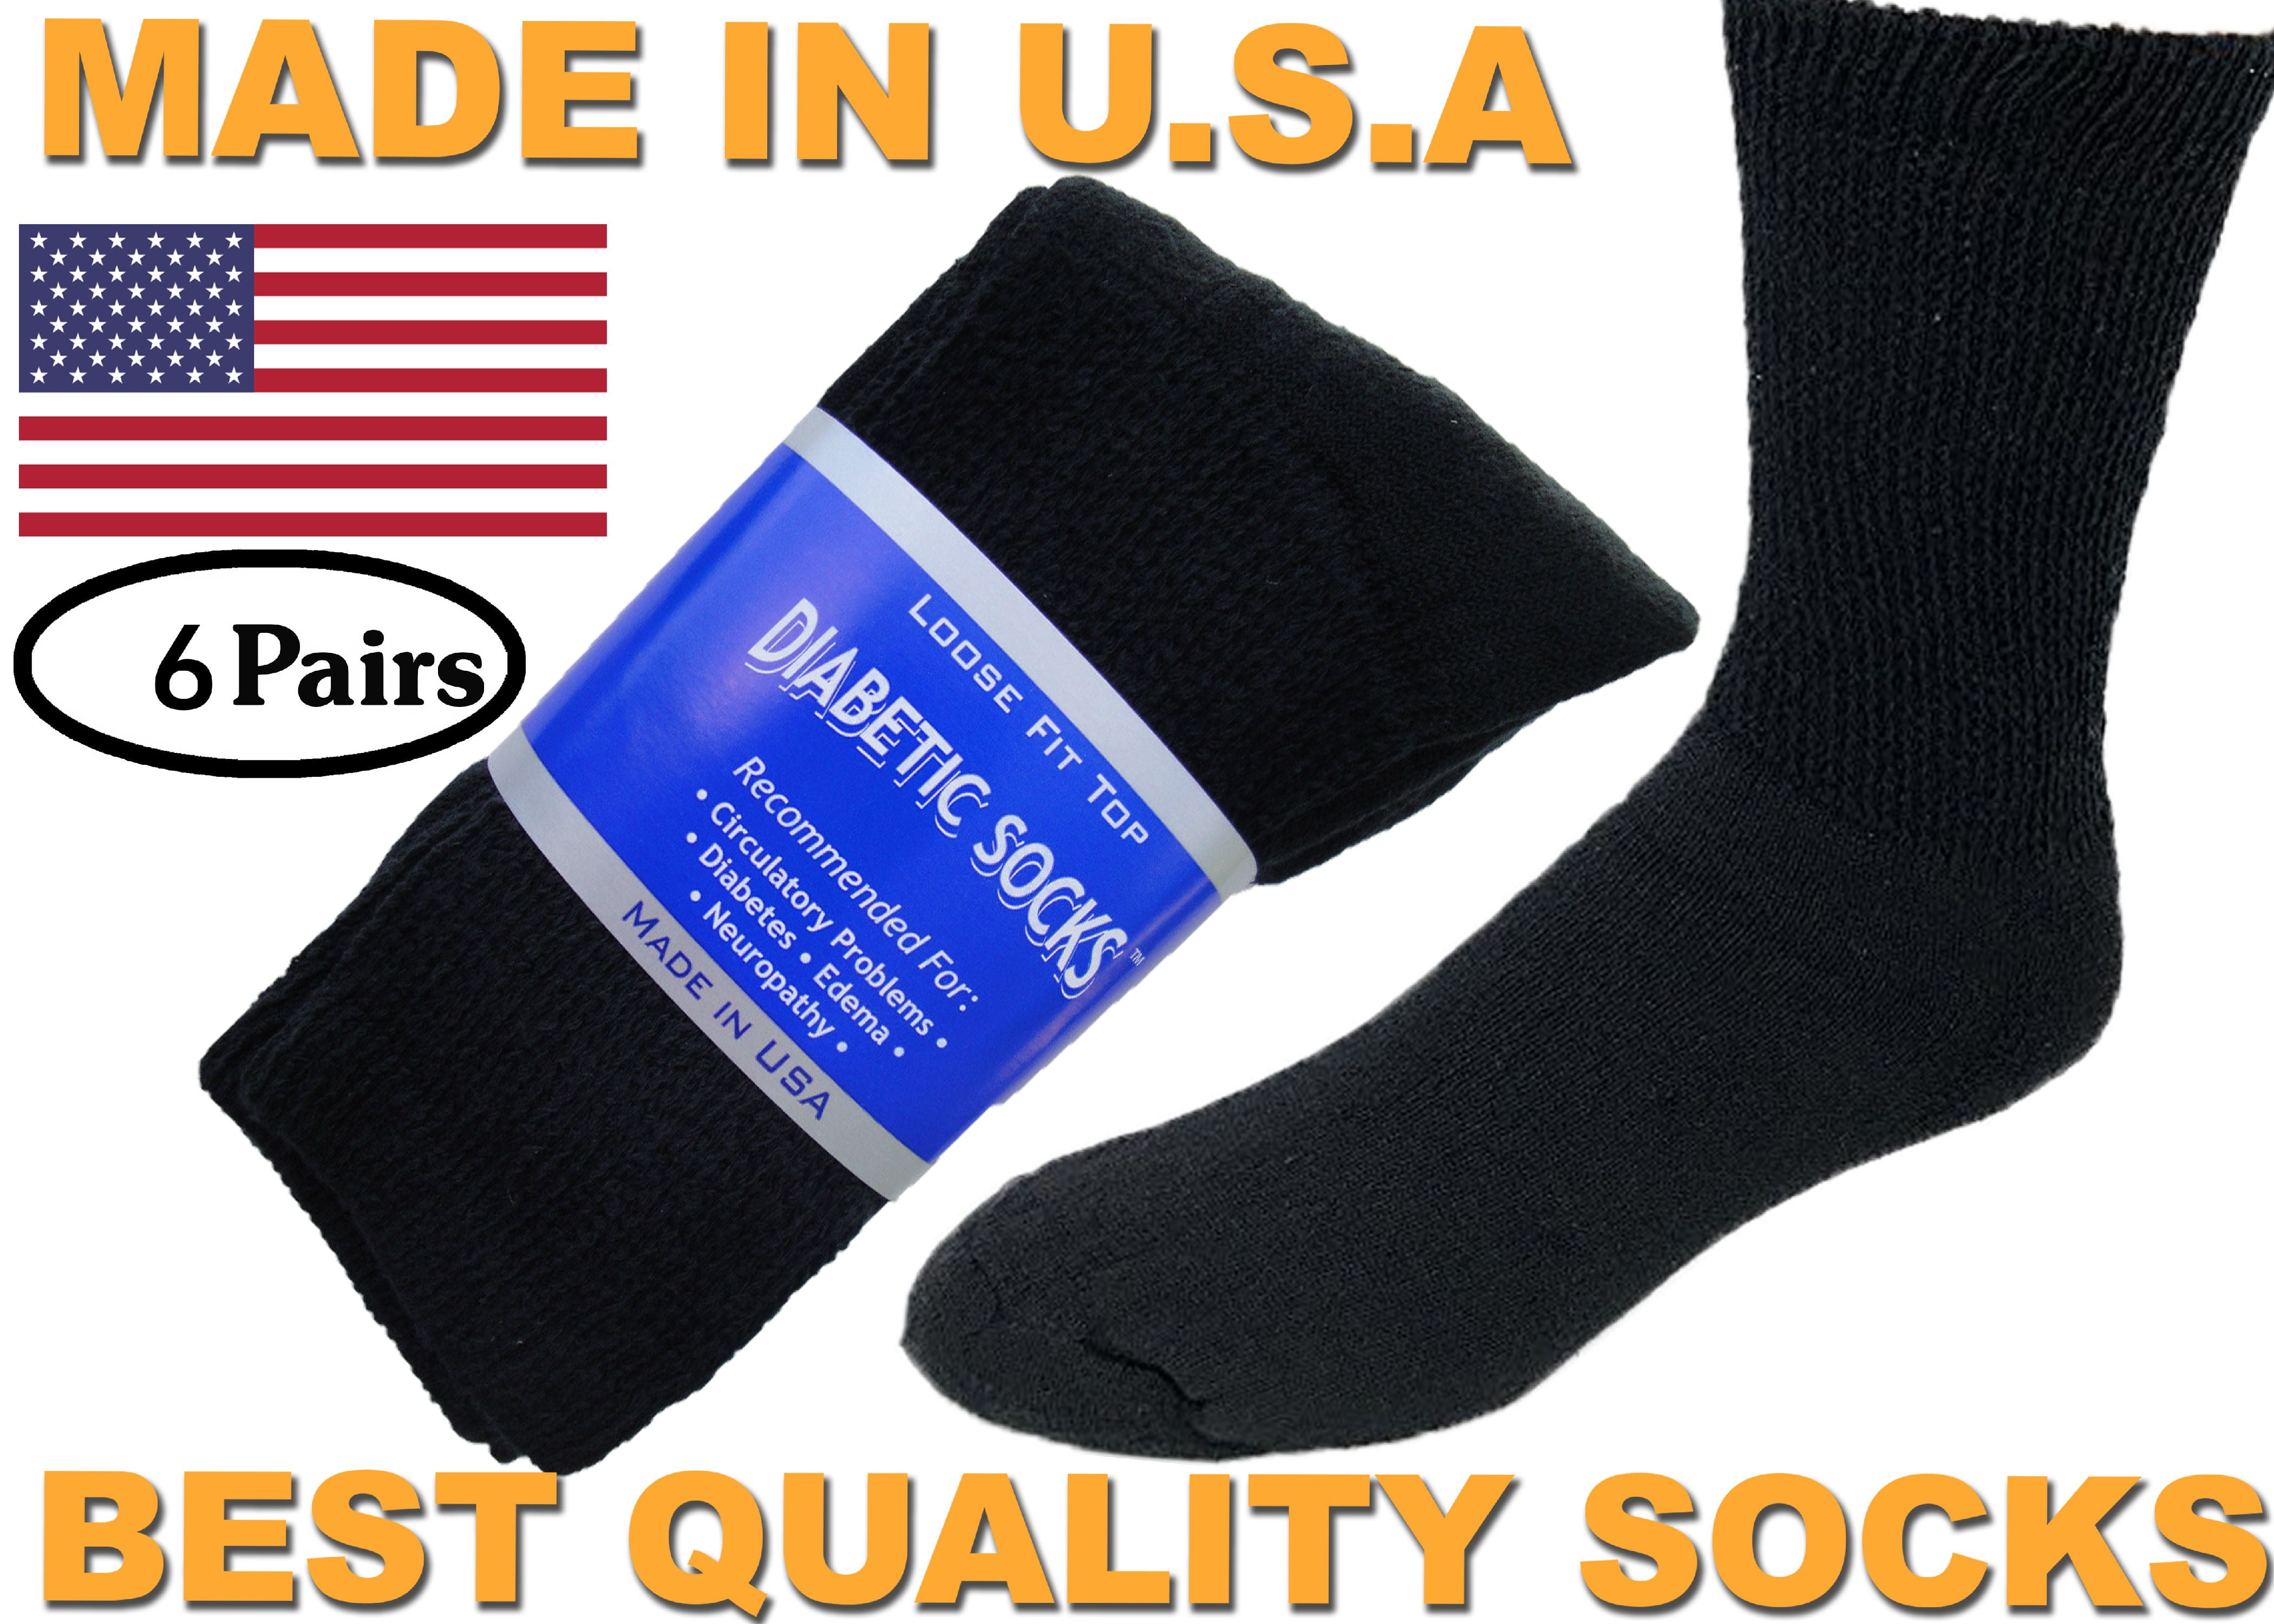 12 18 Pairs Made In USA Diabetic Socks Black And White Top Quality Creswell 6 